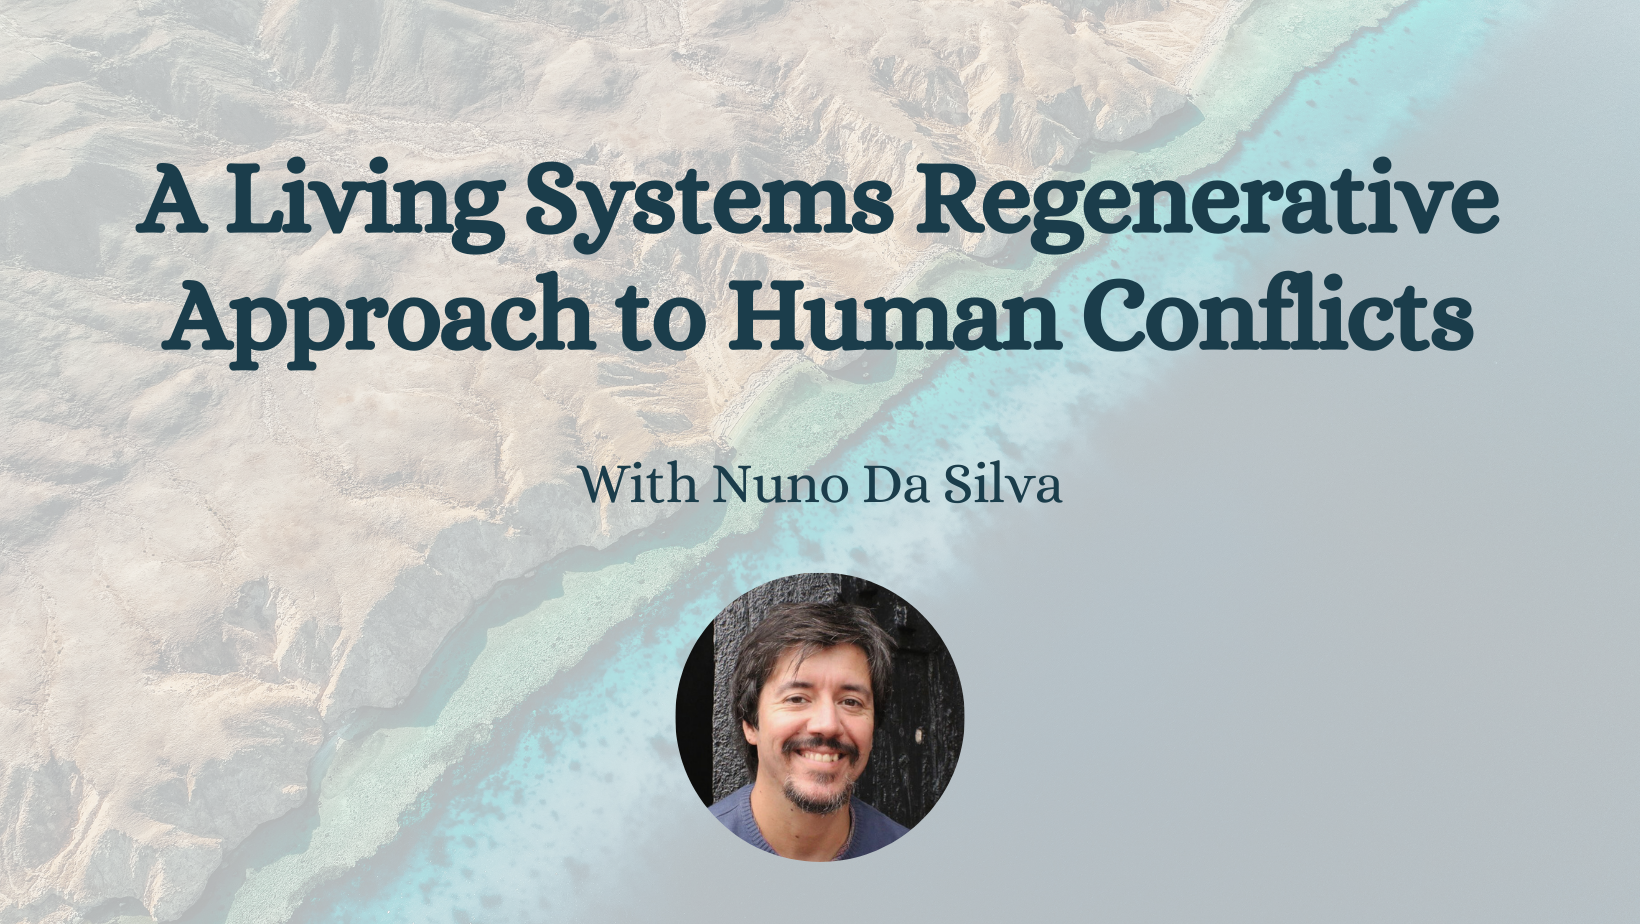 A Living Systems Regenerative Approach to Human Conflicts webinar recording available